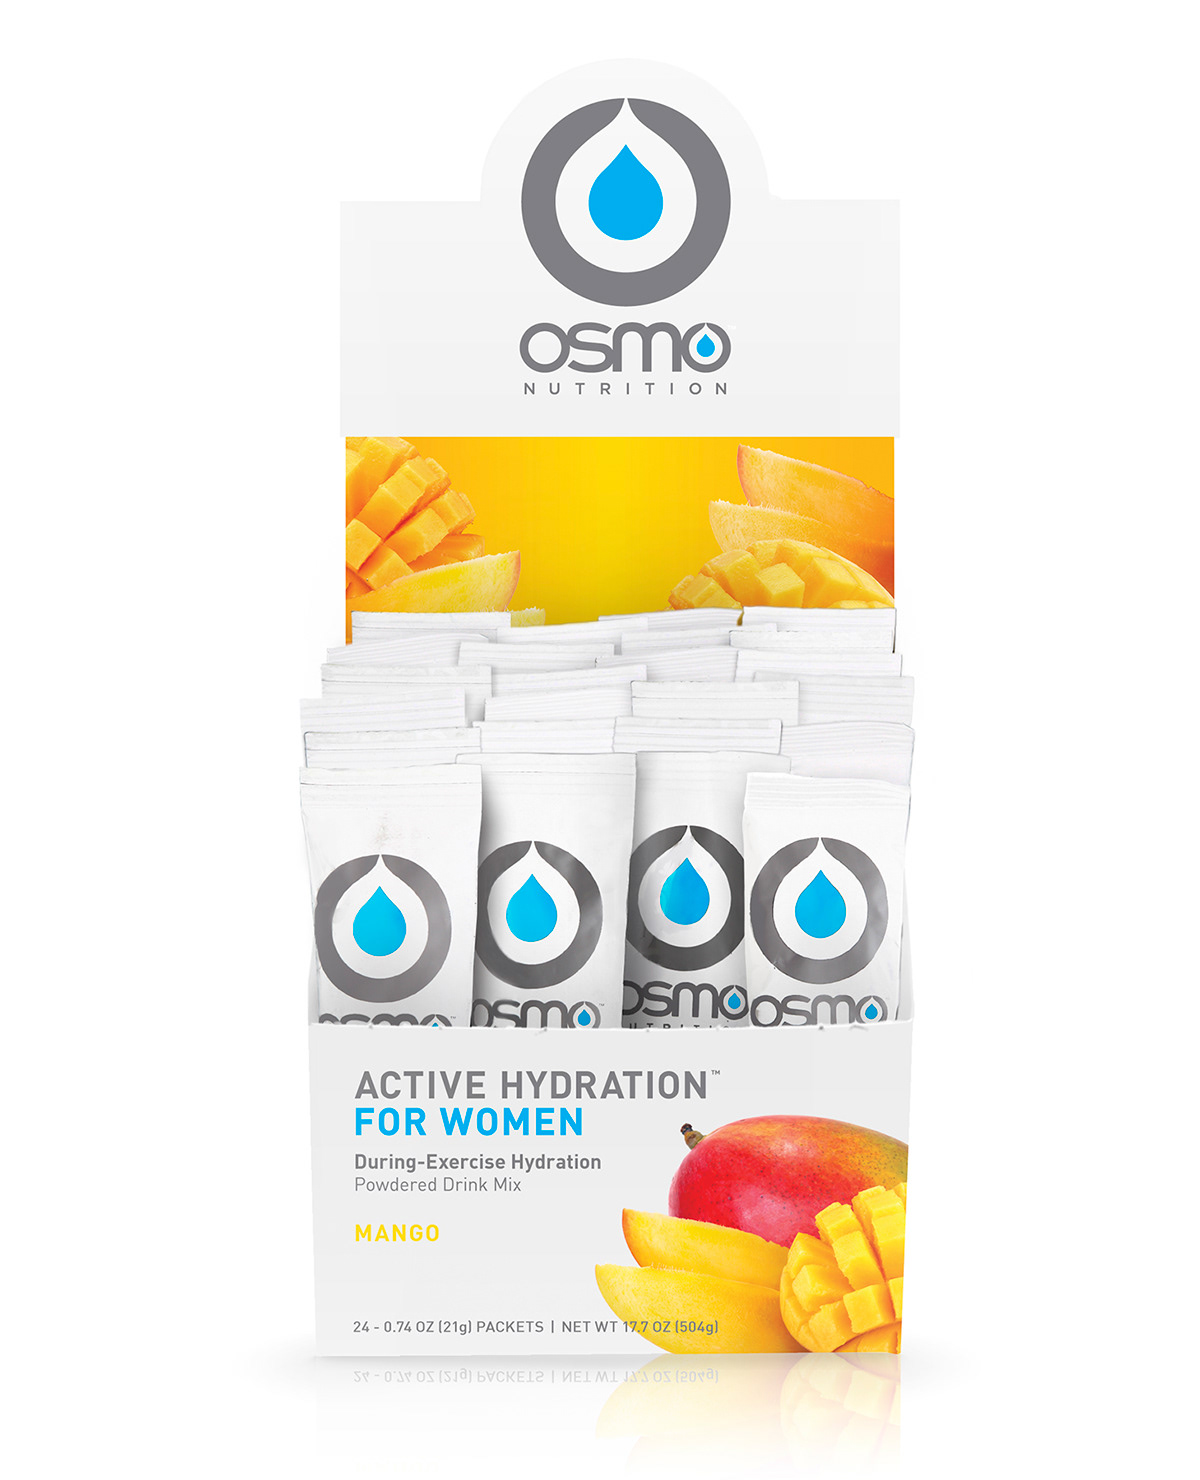 Osmo nutrition package design 